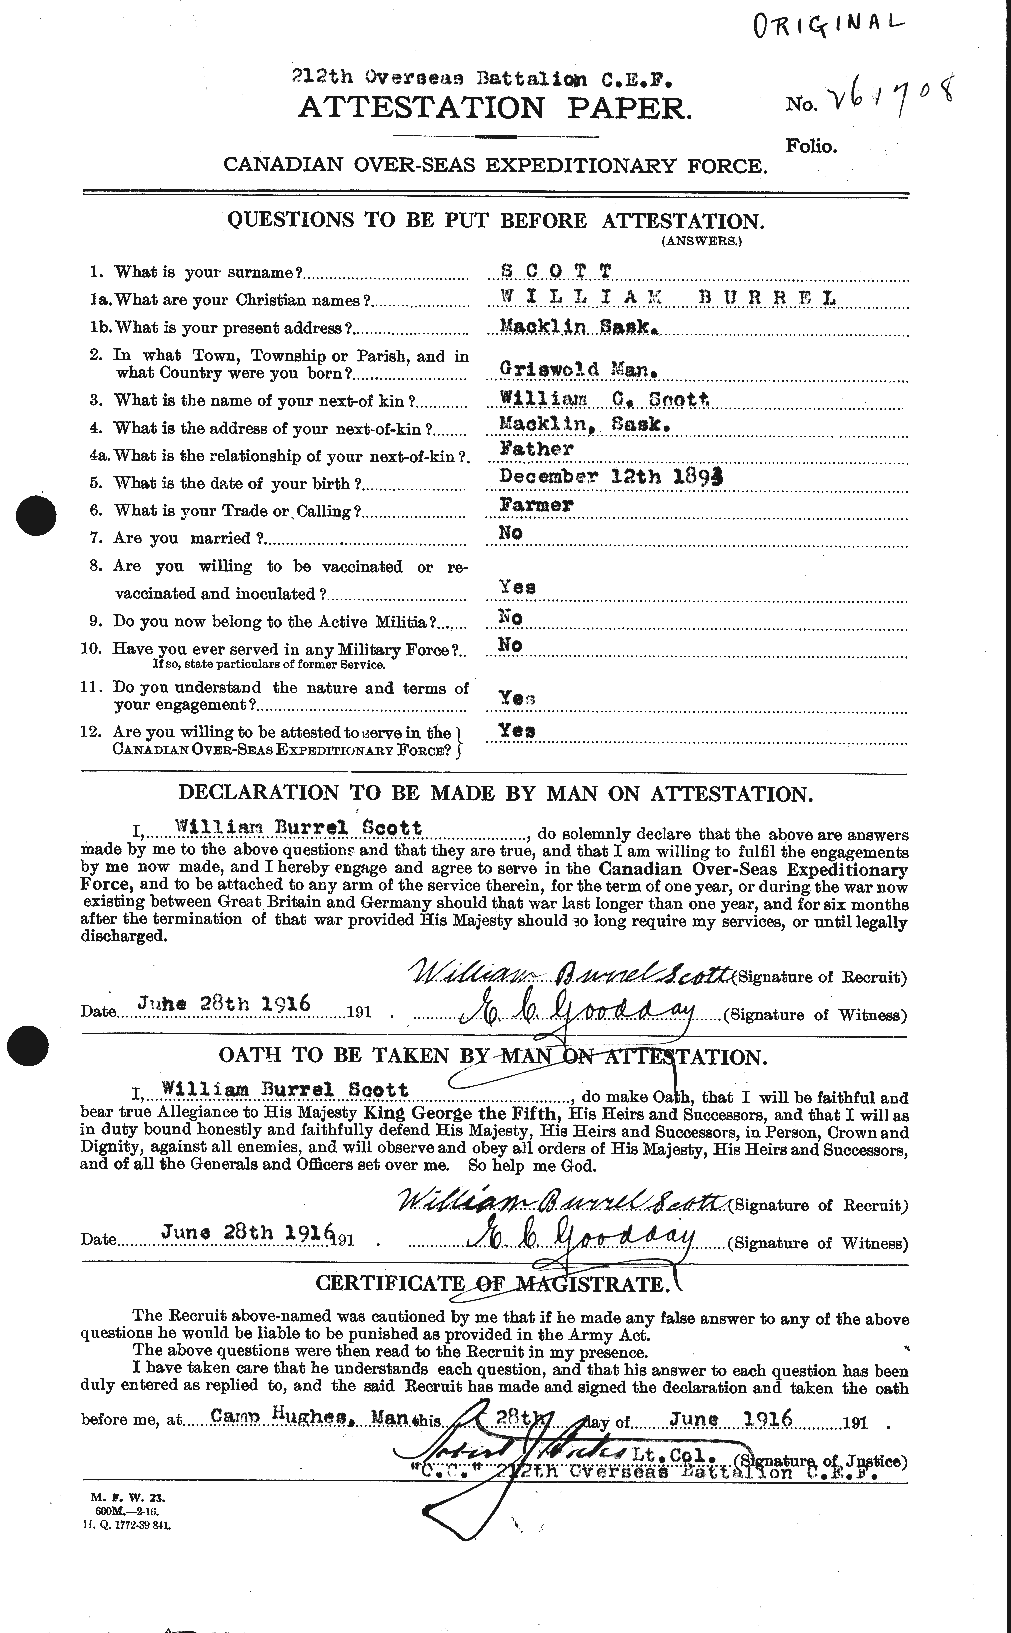 Personnel Records of the First World War - CEF 087047a